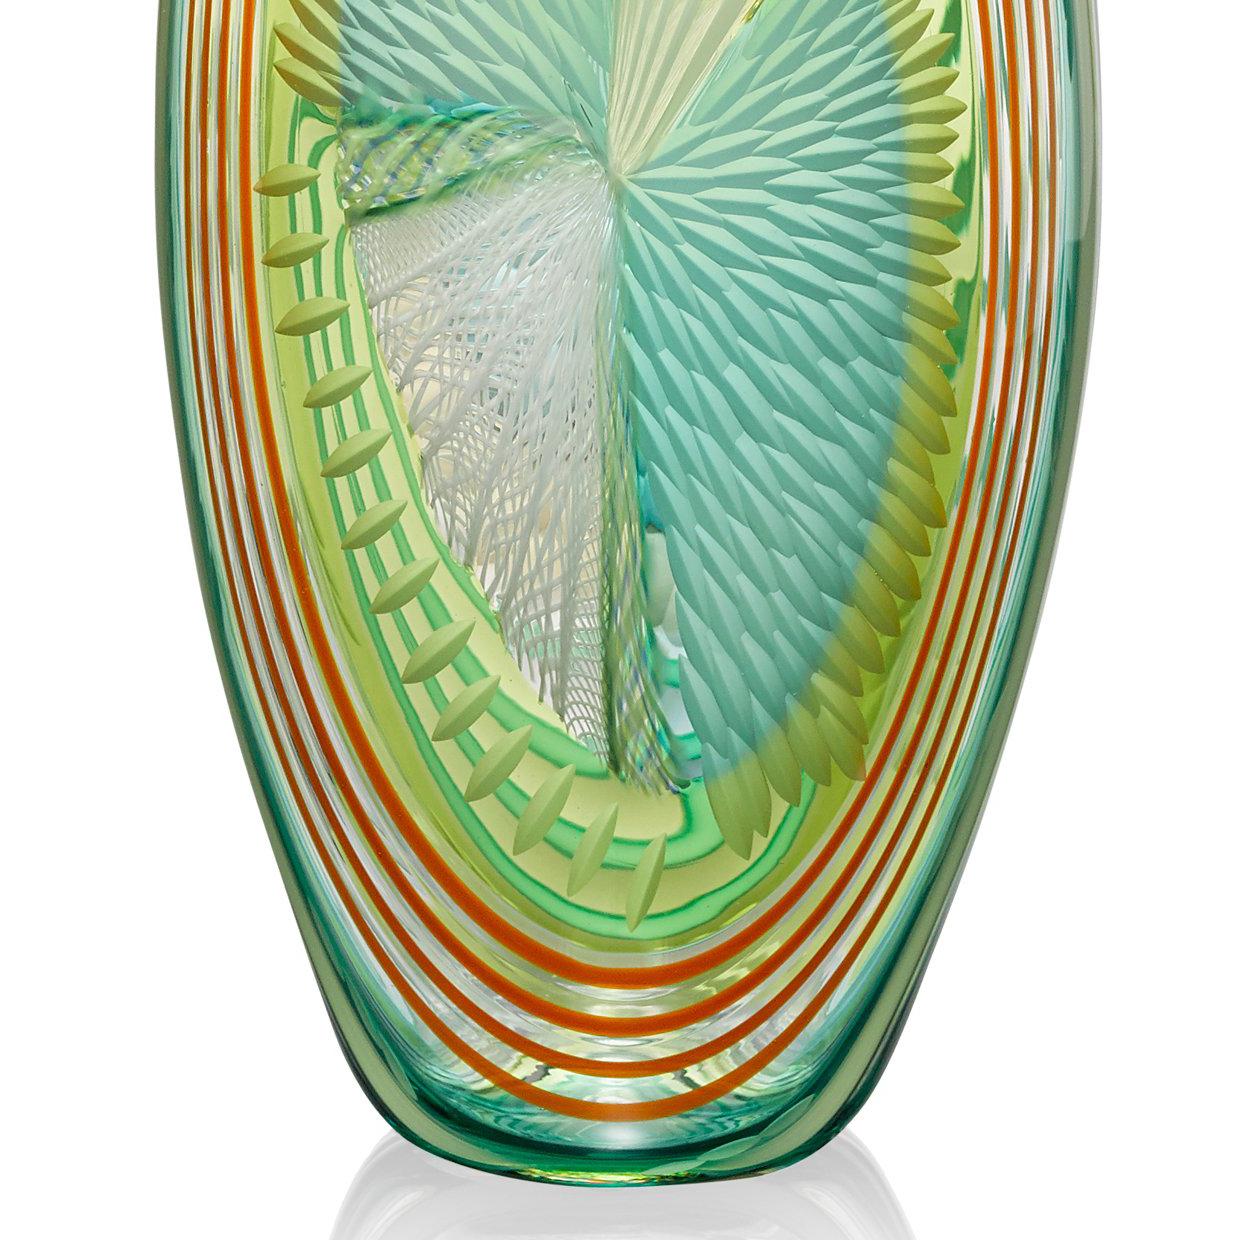 Unique oblong vase with irregular shaped mouth using traditional Murano glassblowing and cold-working techniques.
